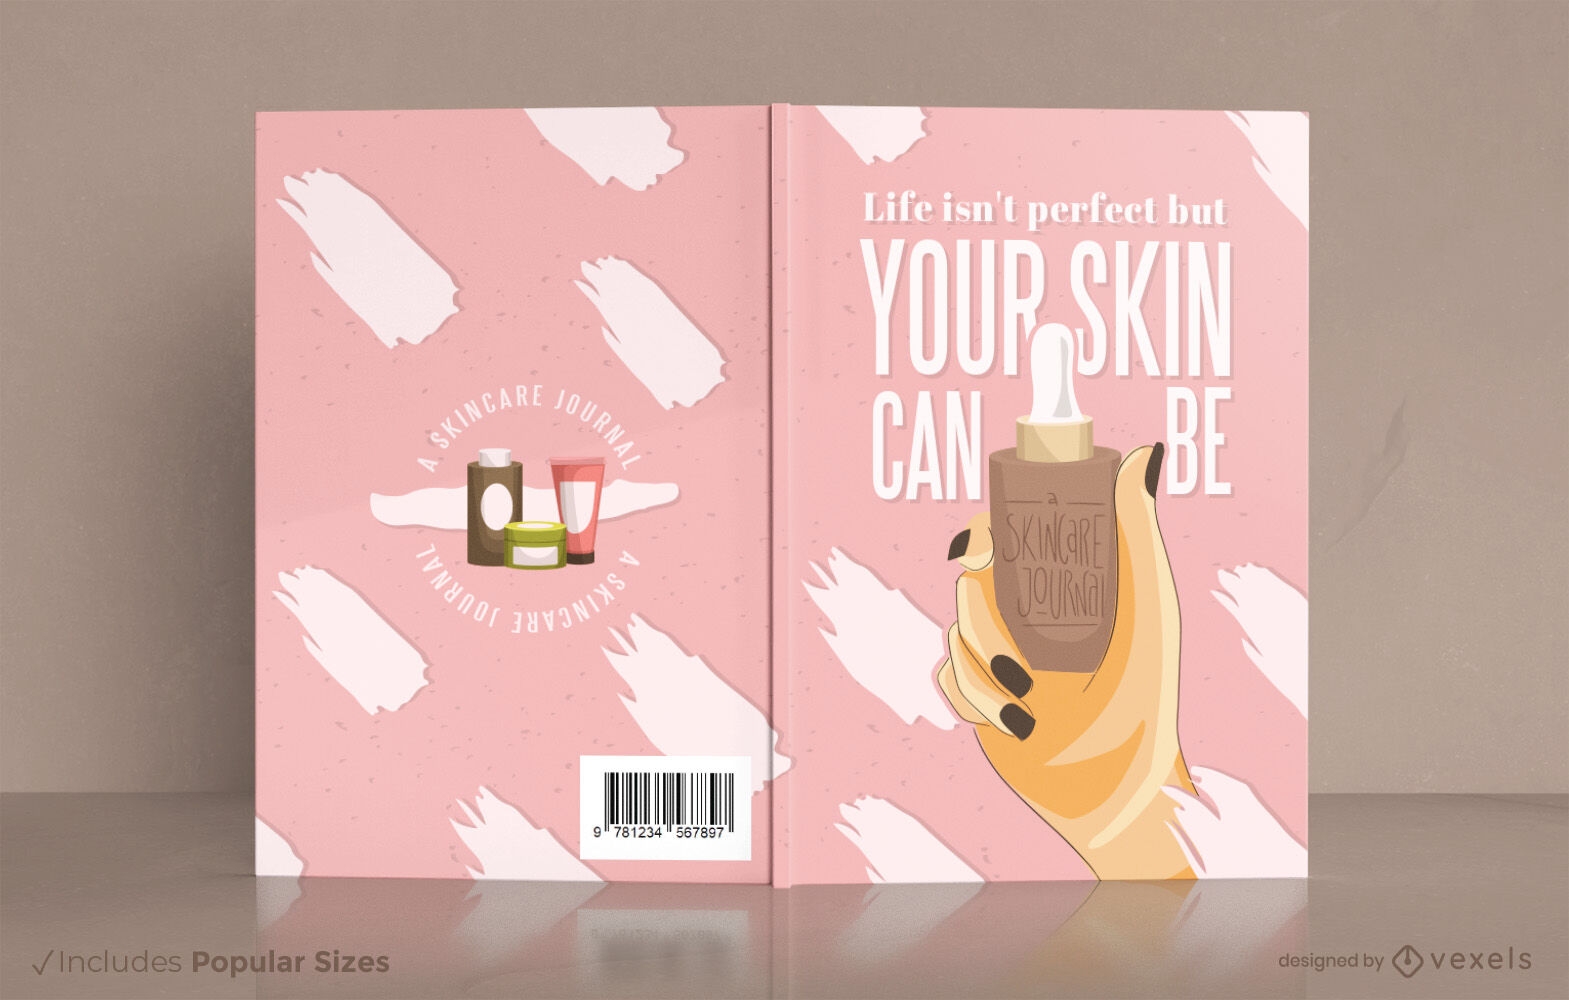 Skin care beauty products book cover design